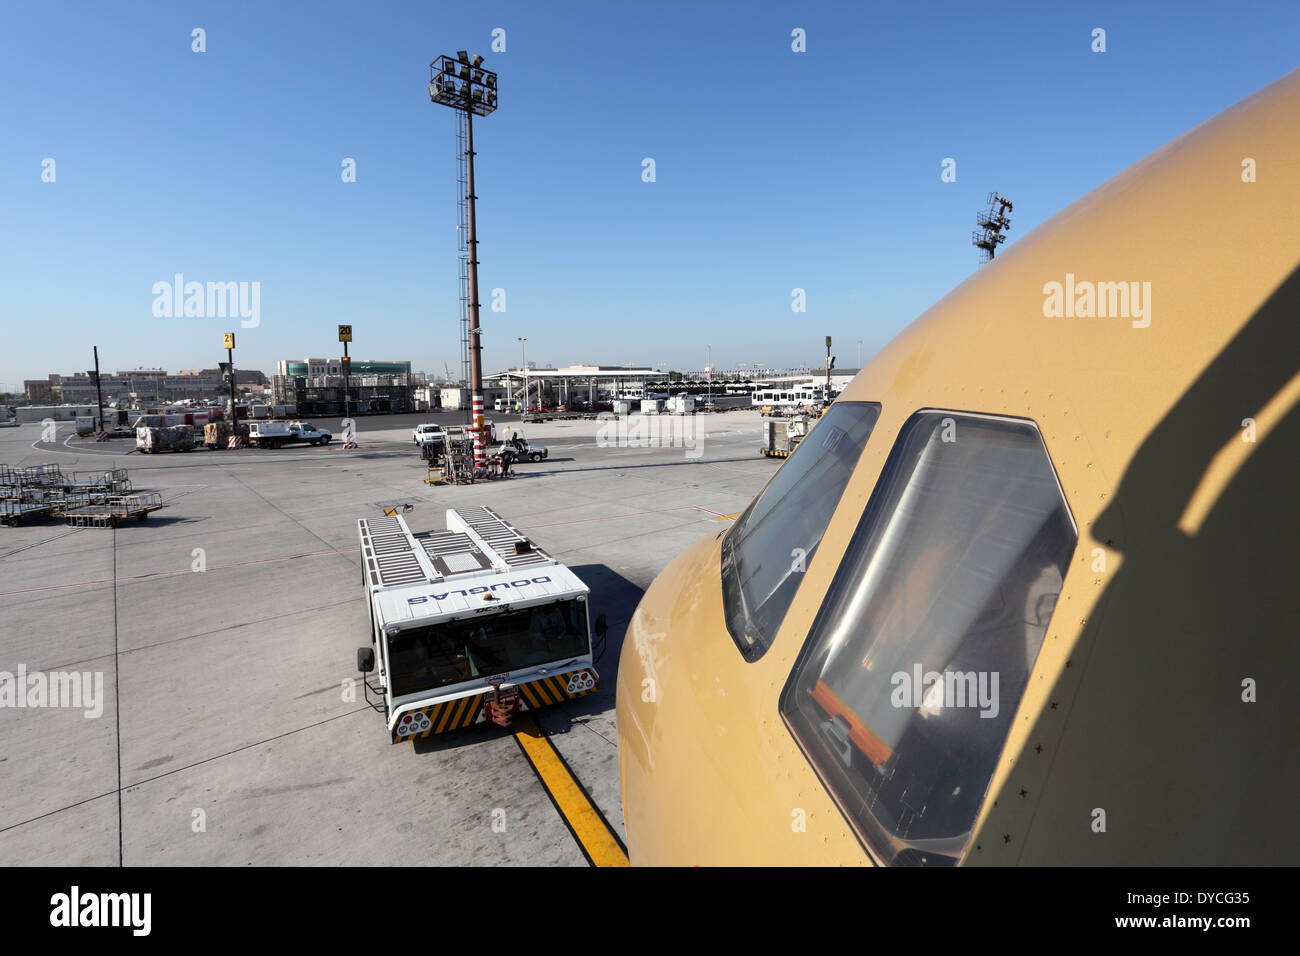 Gulf Air airplane at the Manama Airport. Kingdom of Bahrain, Middle East Stock Photo